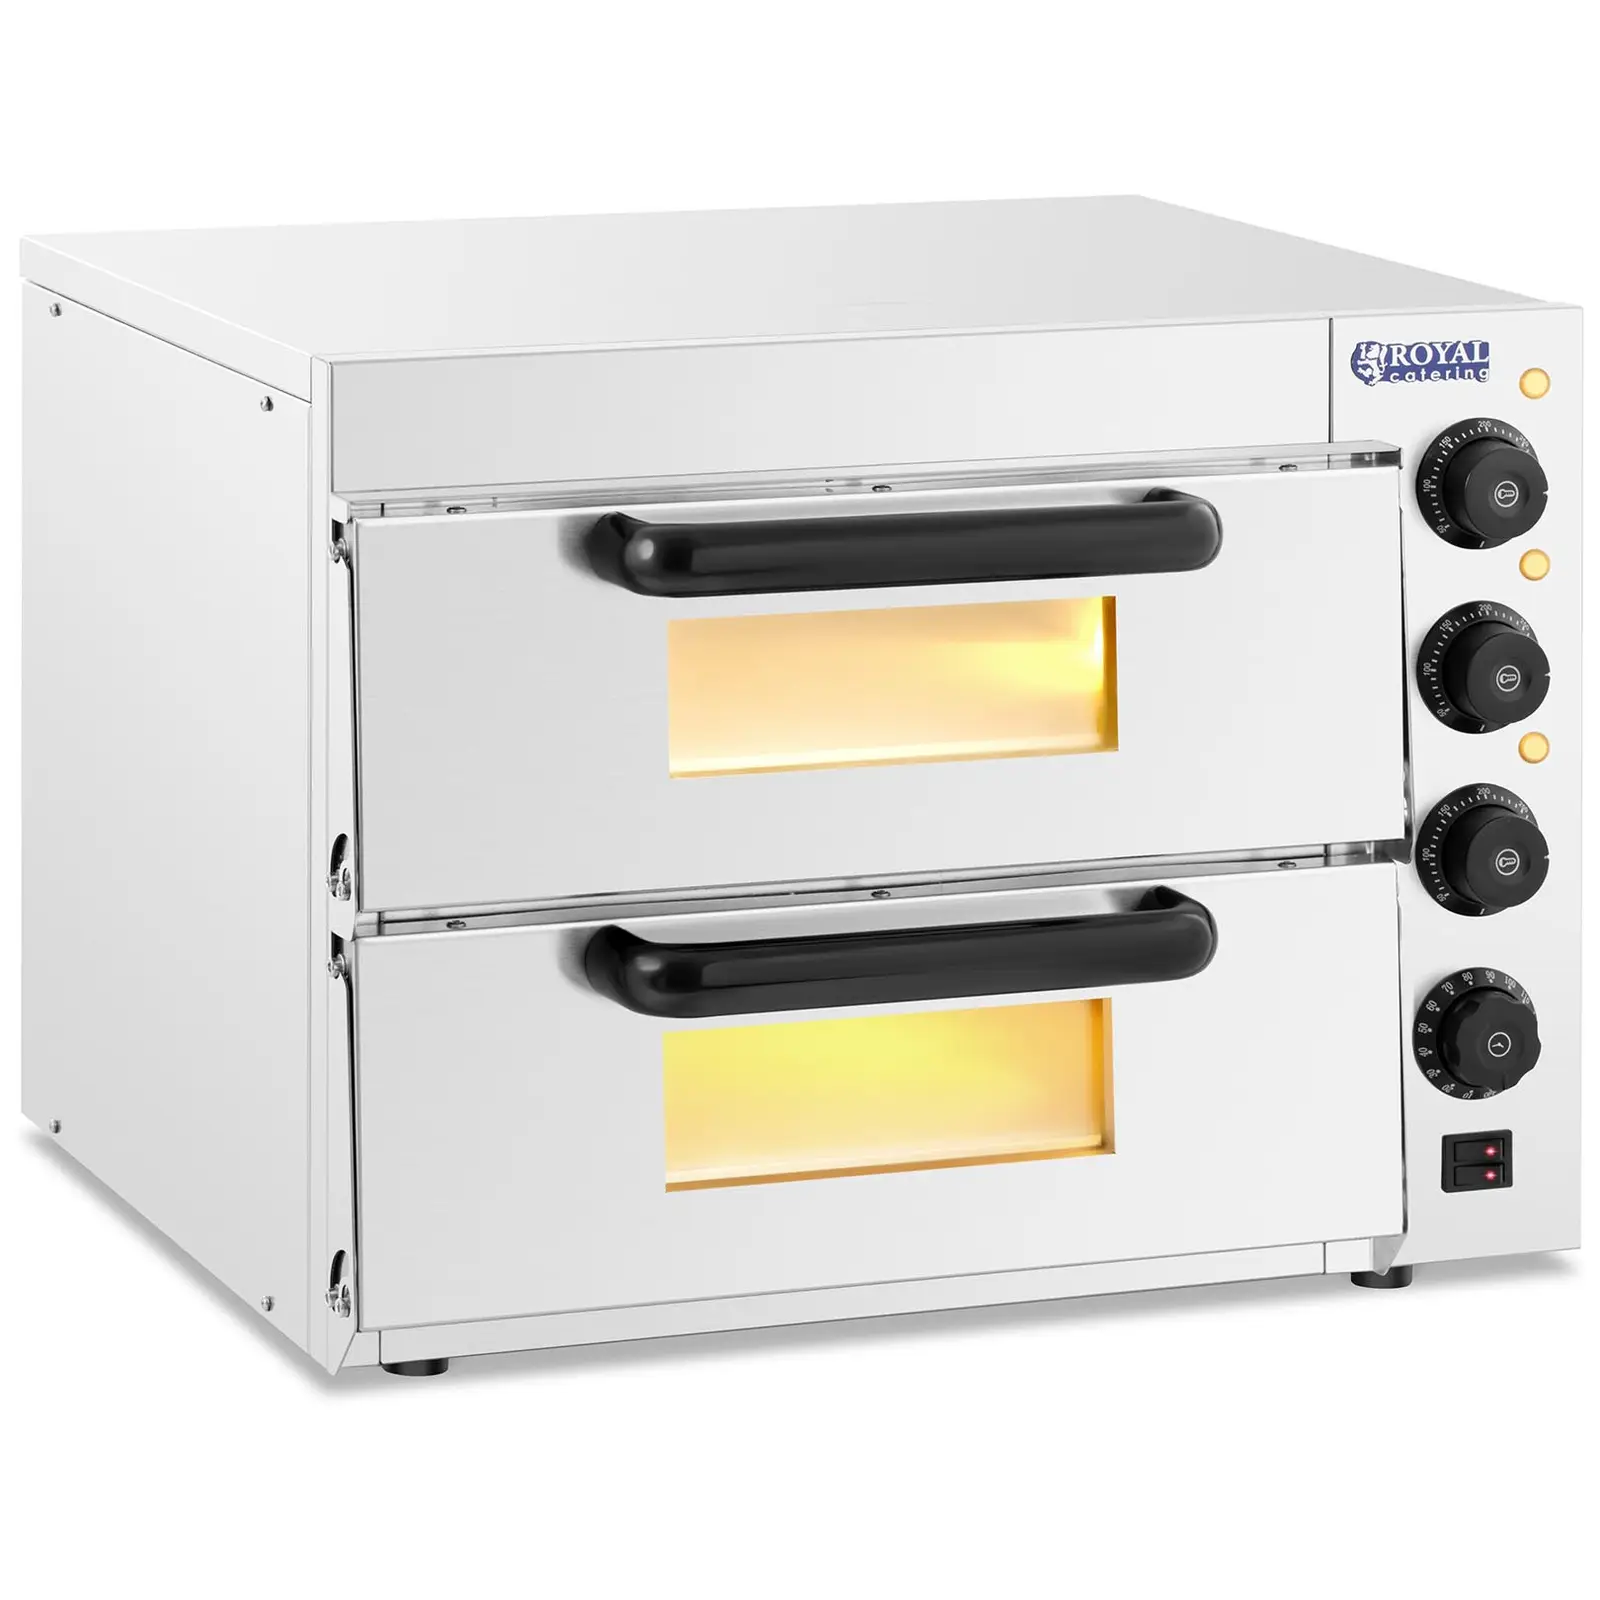 Pizzaugn - 2 kammare - Royal Catering - Chamotte - 3,000 W - 2 x Ø 36 cm